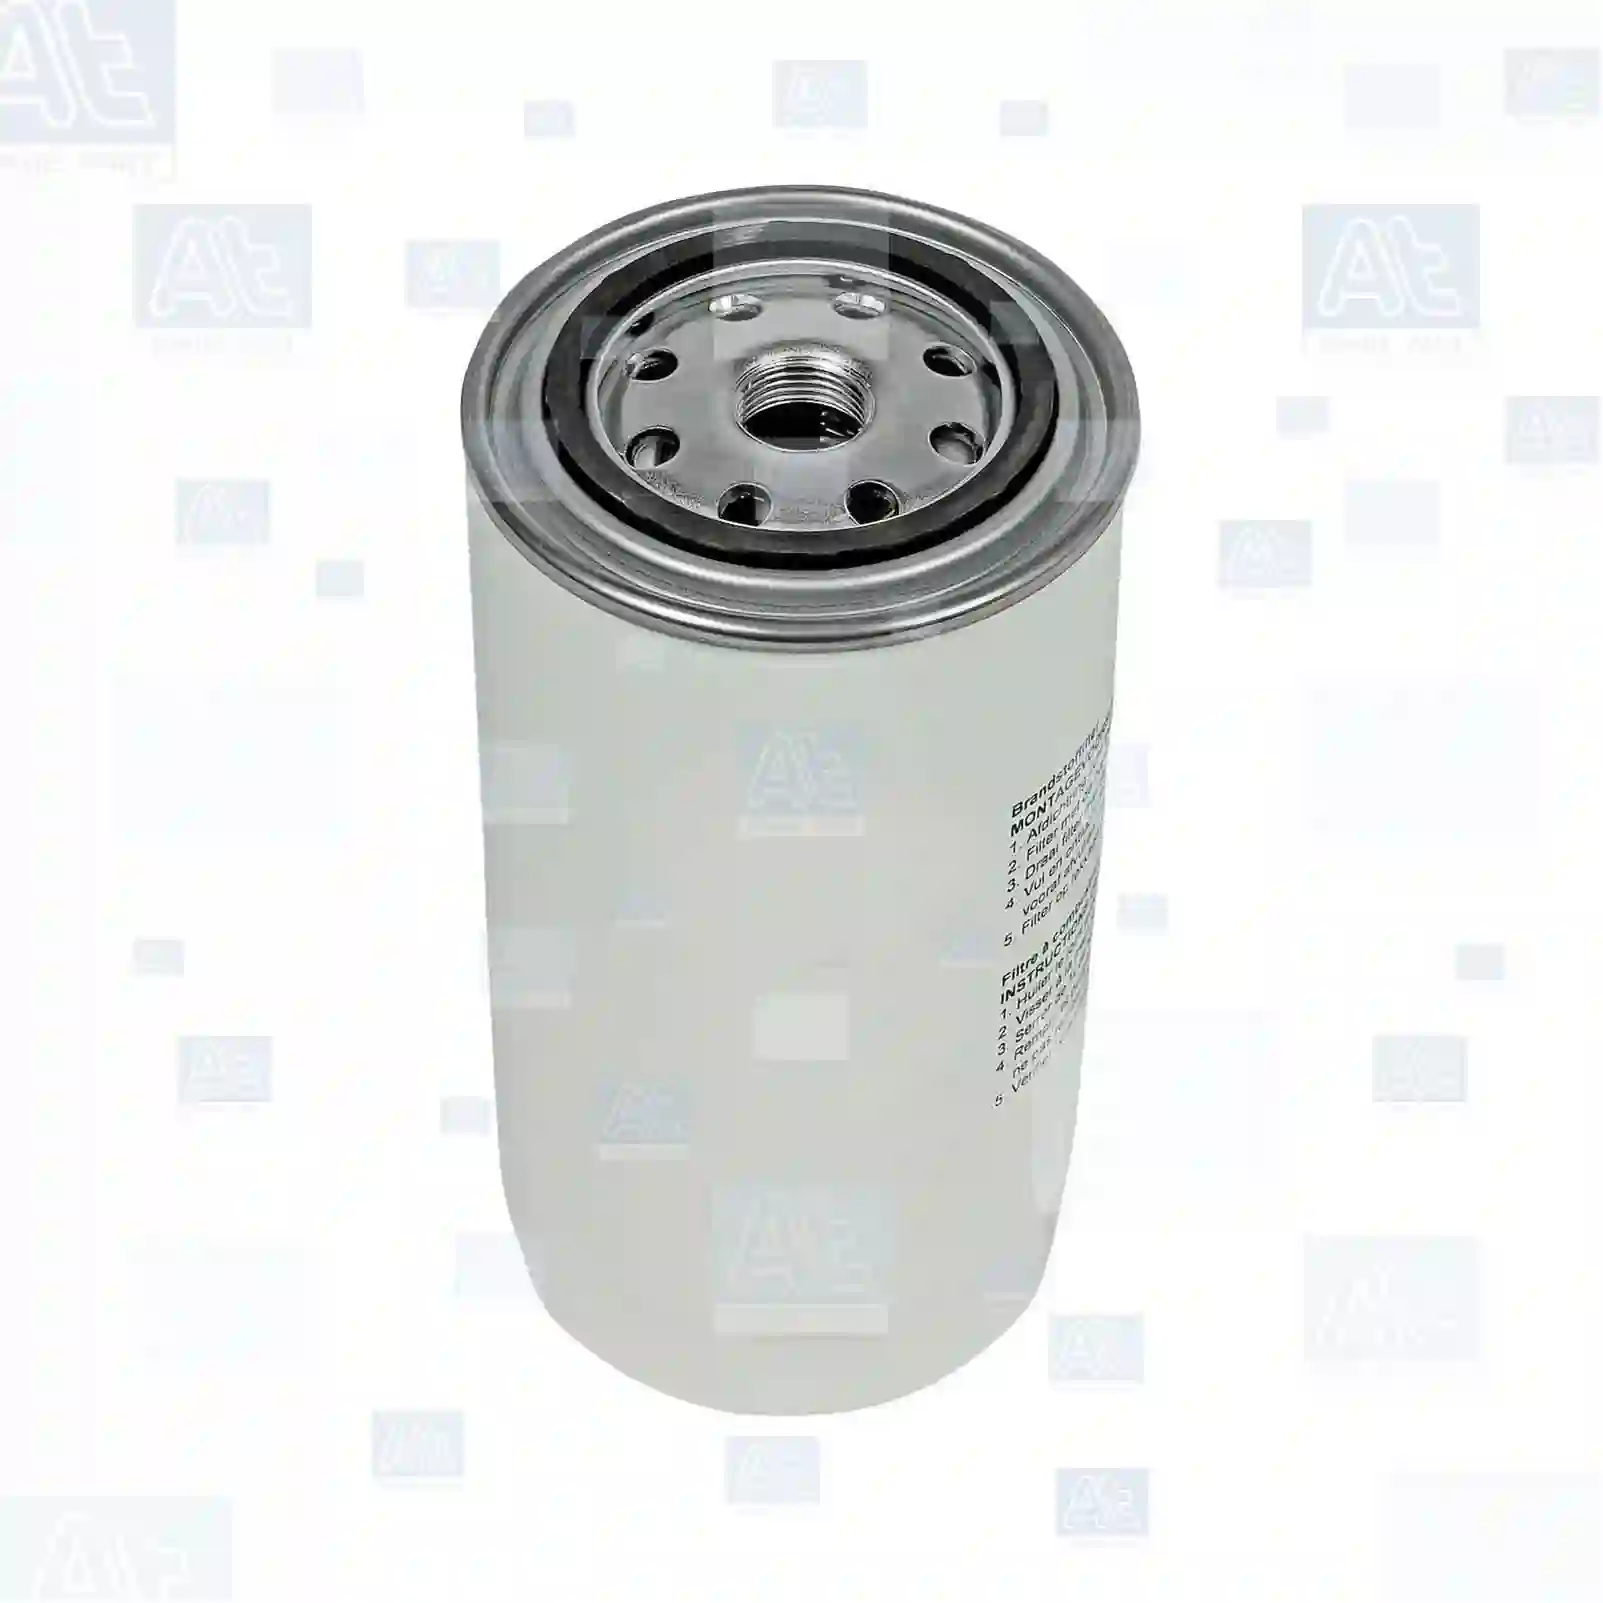 Fuel filter, 77723356, 402030901, 4894548, 4897833, 489783300, Z489783300, 9P916095, 7006269, 84412164, 87803200, 87803208, 3978040, 4894548, 4897833, 4897897, 4989106, FF0542100, 1399760, 1529640, 1705122, 1829166, DP010206, 01399760, 02992241, 04894548, 504033400, BG5X-9155-AA, 9414101755, 02943501, 02943501, 02992241, 2992241, 500039730, 500040957, 503120786, 503621941, 504033400, 504043765, 504292579, 5801729418, 32/925919, 32/925932, 32/926138, 33/3Y7208, RECFF0542100, 0521117010, K1399760PAC, 299008330, 323016450, 711853A1, 323016450, 16400-LA40A, 16401-LA40A, 4894548, 4897897, 87803208, 570107999901, 16400LA40A, 30045440, 14559479, 43919943, 2R0127177B, ZG10133-0008 ||  77723356 At Spare Part | Engine, Accelerator Pedal, Camshaft, Connecting Rod, Crankcase, Crankshaft, Cylinder Head, Engine Suspension Mountings, Exhaust Manifold, Exhaust Gas Recirculation, Filter Kits, Flywheel Housing, General Overhaul Kits, Engine, Intake Manifold, Oil Cleaner, Oil Cooler, Oil Filter, Oil Pump, Oil Sump, Piston & Liner, Sensor & Switch, Timing Case, Turbocharger, Cooling System, Belt Tensioner, Coolant Filter, Coolant Pipe, Corrosion Prevention Agent, Drive, Expansion Tank, Fan, Intercooler, Monitors & Gauges, Radiator, Thermostat, V-Belt / Timing belt, Water Pump, Fuel System, Electronical Injector Unit, Feed Pump, Fuel Filter, cpl., Fuel Gauge Sender,  Fuel Line, Fuel Pump, Fuel Tank, Injection Line Kit, Injection Pump, Exhaust System, Clutch & Pedal, Gearbox, Propeller Shaft, Axles, Brake System, Hubs & Wheels, Suspension, Leaf Spring, Universal Parts / Accessories, Steering, Electrical System, Cabin Fuel filter, 77723356, 402030901, 4894548, 4897833, 489783300, Z489783300, 9P916095, 7006269, 84412164, 87803200, 87803208, 3978040, 4894548, 4897833, 4897897, 4989106, FF0542100, 1399760, 1529640, 1705122, 1829166, DP010206, 01399760, 02992241, 04894548, 504033400, BG5X-9155-AA, 9414101755, 02943501, 02943501, 02992241, 2992241, 500039730, 500040957, 503120786, 503621941, 504033400, 504043765, 504292579, 5801729418, 32/925919, 32/925932, 32/926138, 33/3Y7208, RECFF0542100, 0521117010, K1399760PAC, 299008330, 323016450, 711853A1, 323016450, 16400-LA40A, 16401-LA40A, 4894548, 4897897, 87803208, 570107999901, 16400LA40A, 30045440, 14559479, 43919943, 2R0127177B, ZG10133-0008 ||  77723356 At Spare Part | Engine, Accelerator Pedal, Camshaft, Connecting Rod, Crankcase, Crankshaft, Cylinder Head, Engine Suspension Mountings, Exhaust Manifold, Exhaust Gas Recirculation, Filter Kits, Flywheel Housing, General Overhaul Kits, Engine, Intake Manifold, Oil Cleaner, Oil Cooler, Oil Filter, Oil Pump, Oil Sump, Piston & Liner, Sensor & Switch, Timing Case, Turbocharger, Cooling System, Belt Tensioner, Coolant Filter, Coolant Pipe, Corrosion Prevention Agent, Drive, Expansion Tank, Fan, Intercooler, Monitors & Gauges, Radiator, Thermostat, V-Belt / Timing belt, Water Pump, Fuel System, Electronical Injector Unit, Feed Pump, Fuel Filter, cpl., Fuel Gauge Sender,  Fuel Line, Fuel Pump, Fuel Tank, Injection Line Kit, Injection Pump, Exhaust System, Clutch & Pedal, Gearbox, Propeller Shaft, Axles, Brake System, Hubs & Wheels, Suspension, Leaf Spring, Universal Parts / Accessories, Steering, Electrical System, Cabin